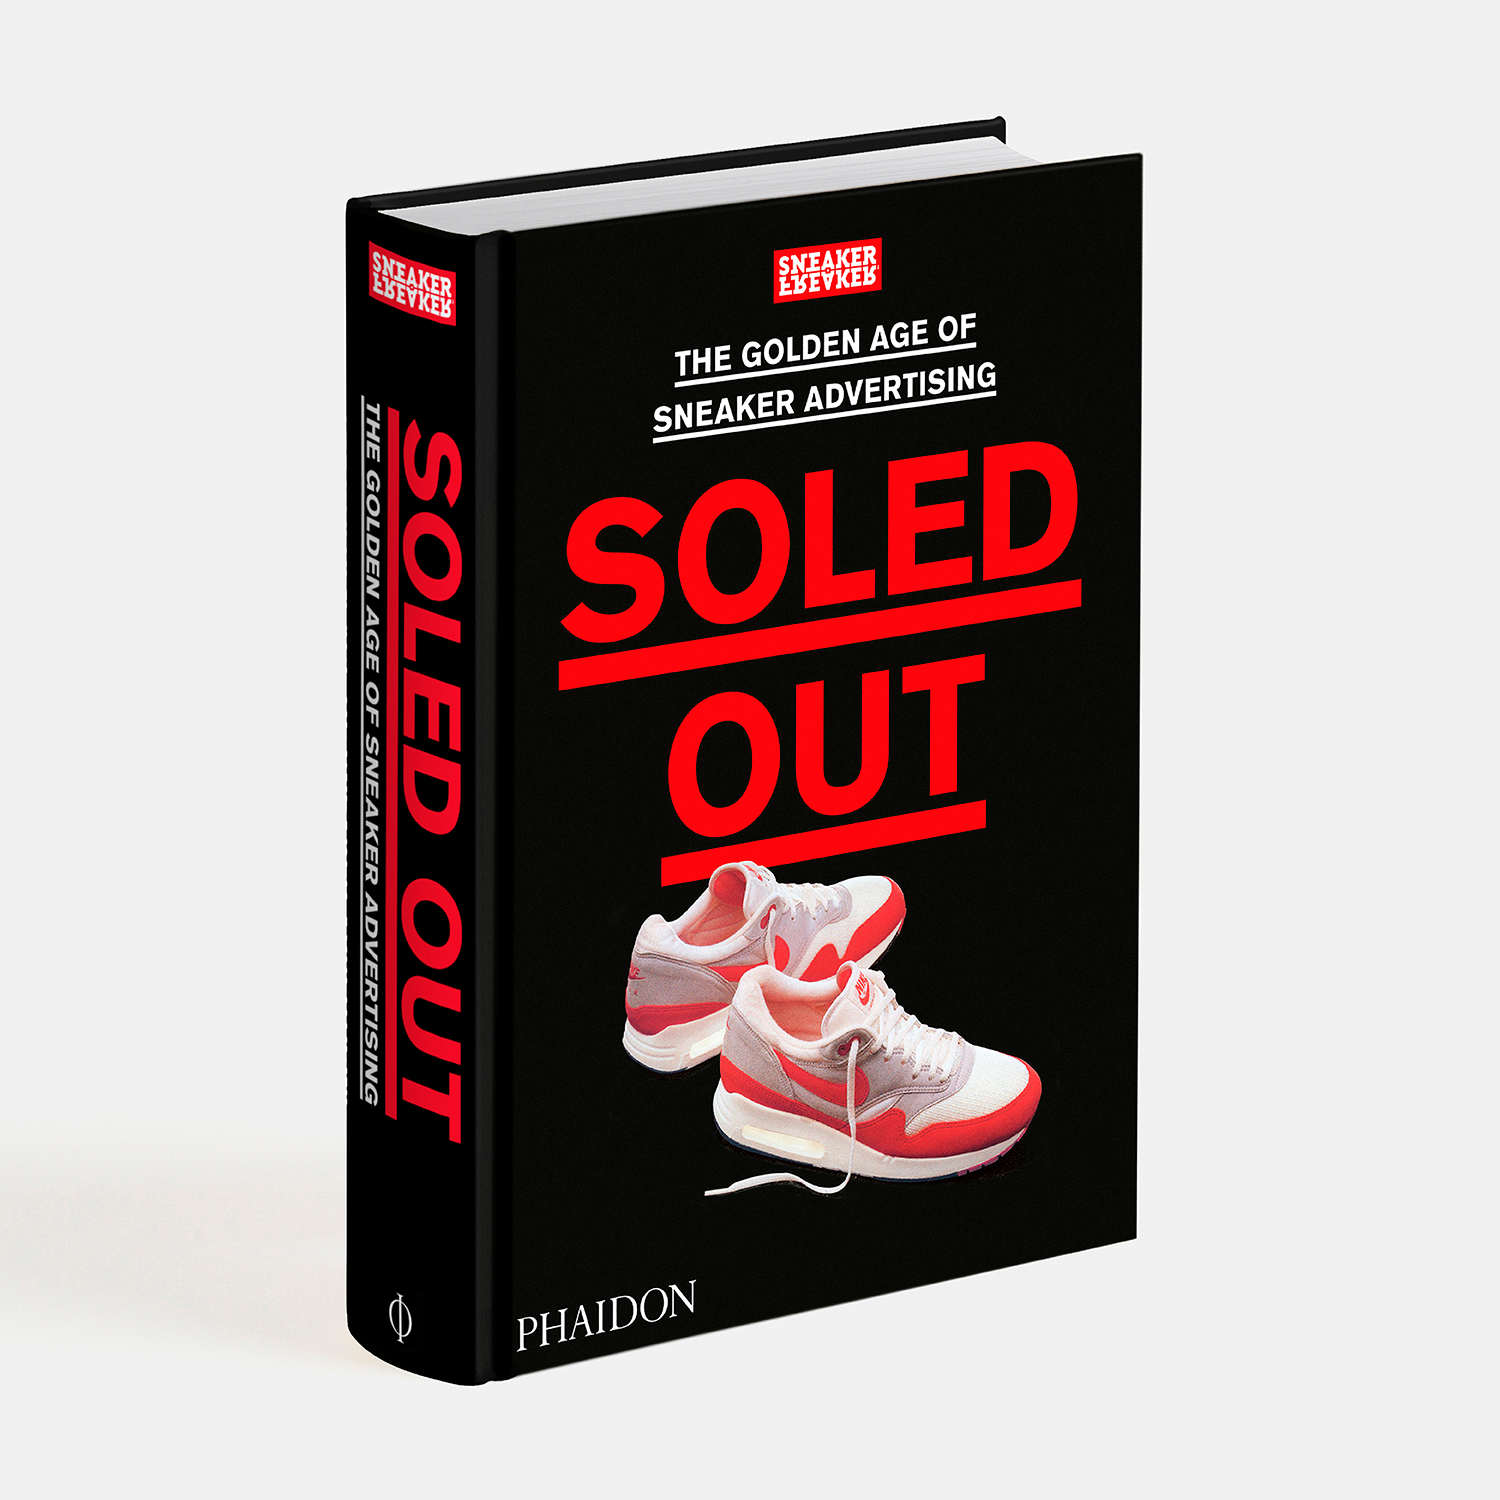 Woody of Sneaker Freaker magazine on Soled Out, sexism and sneaker endorsements